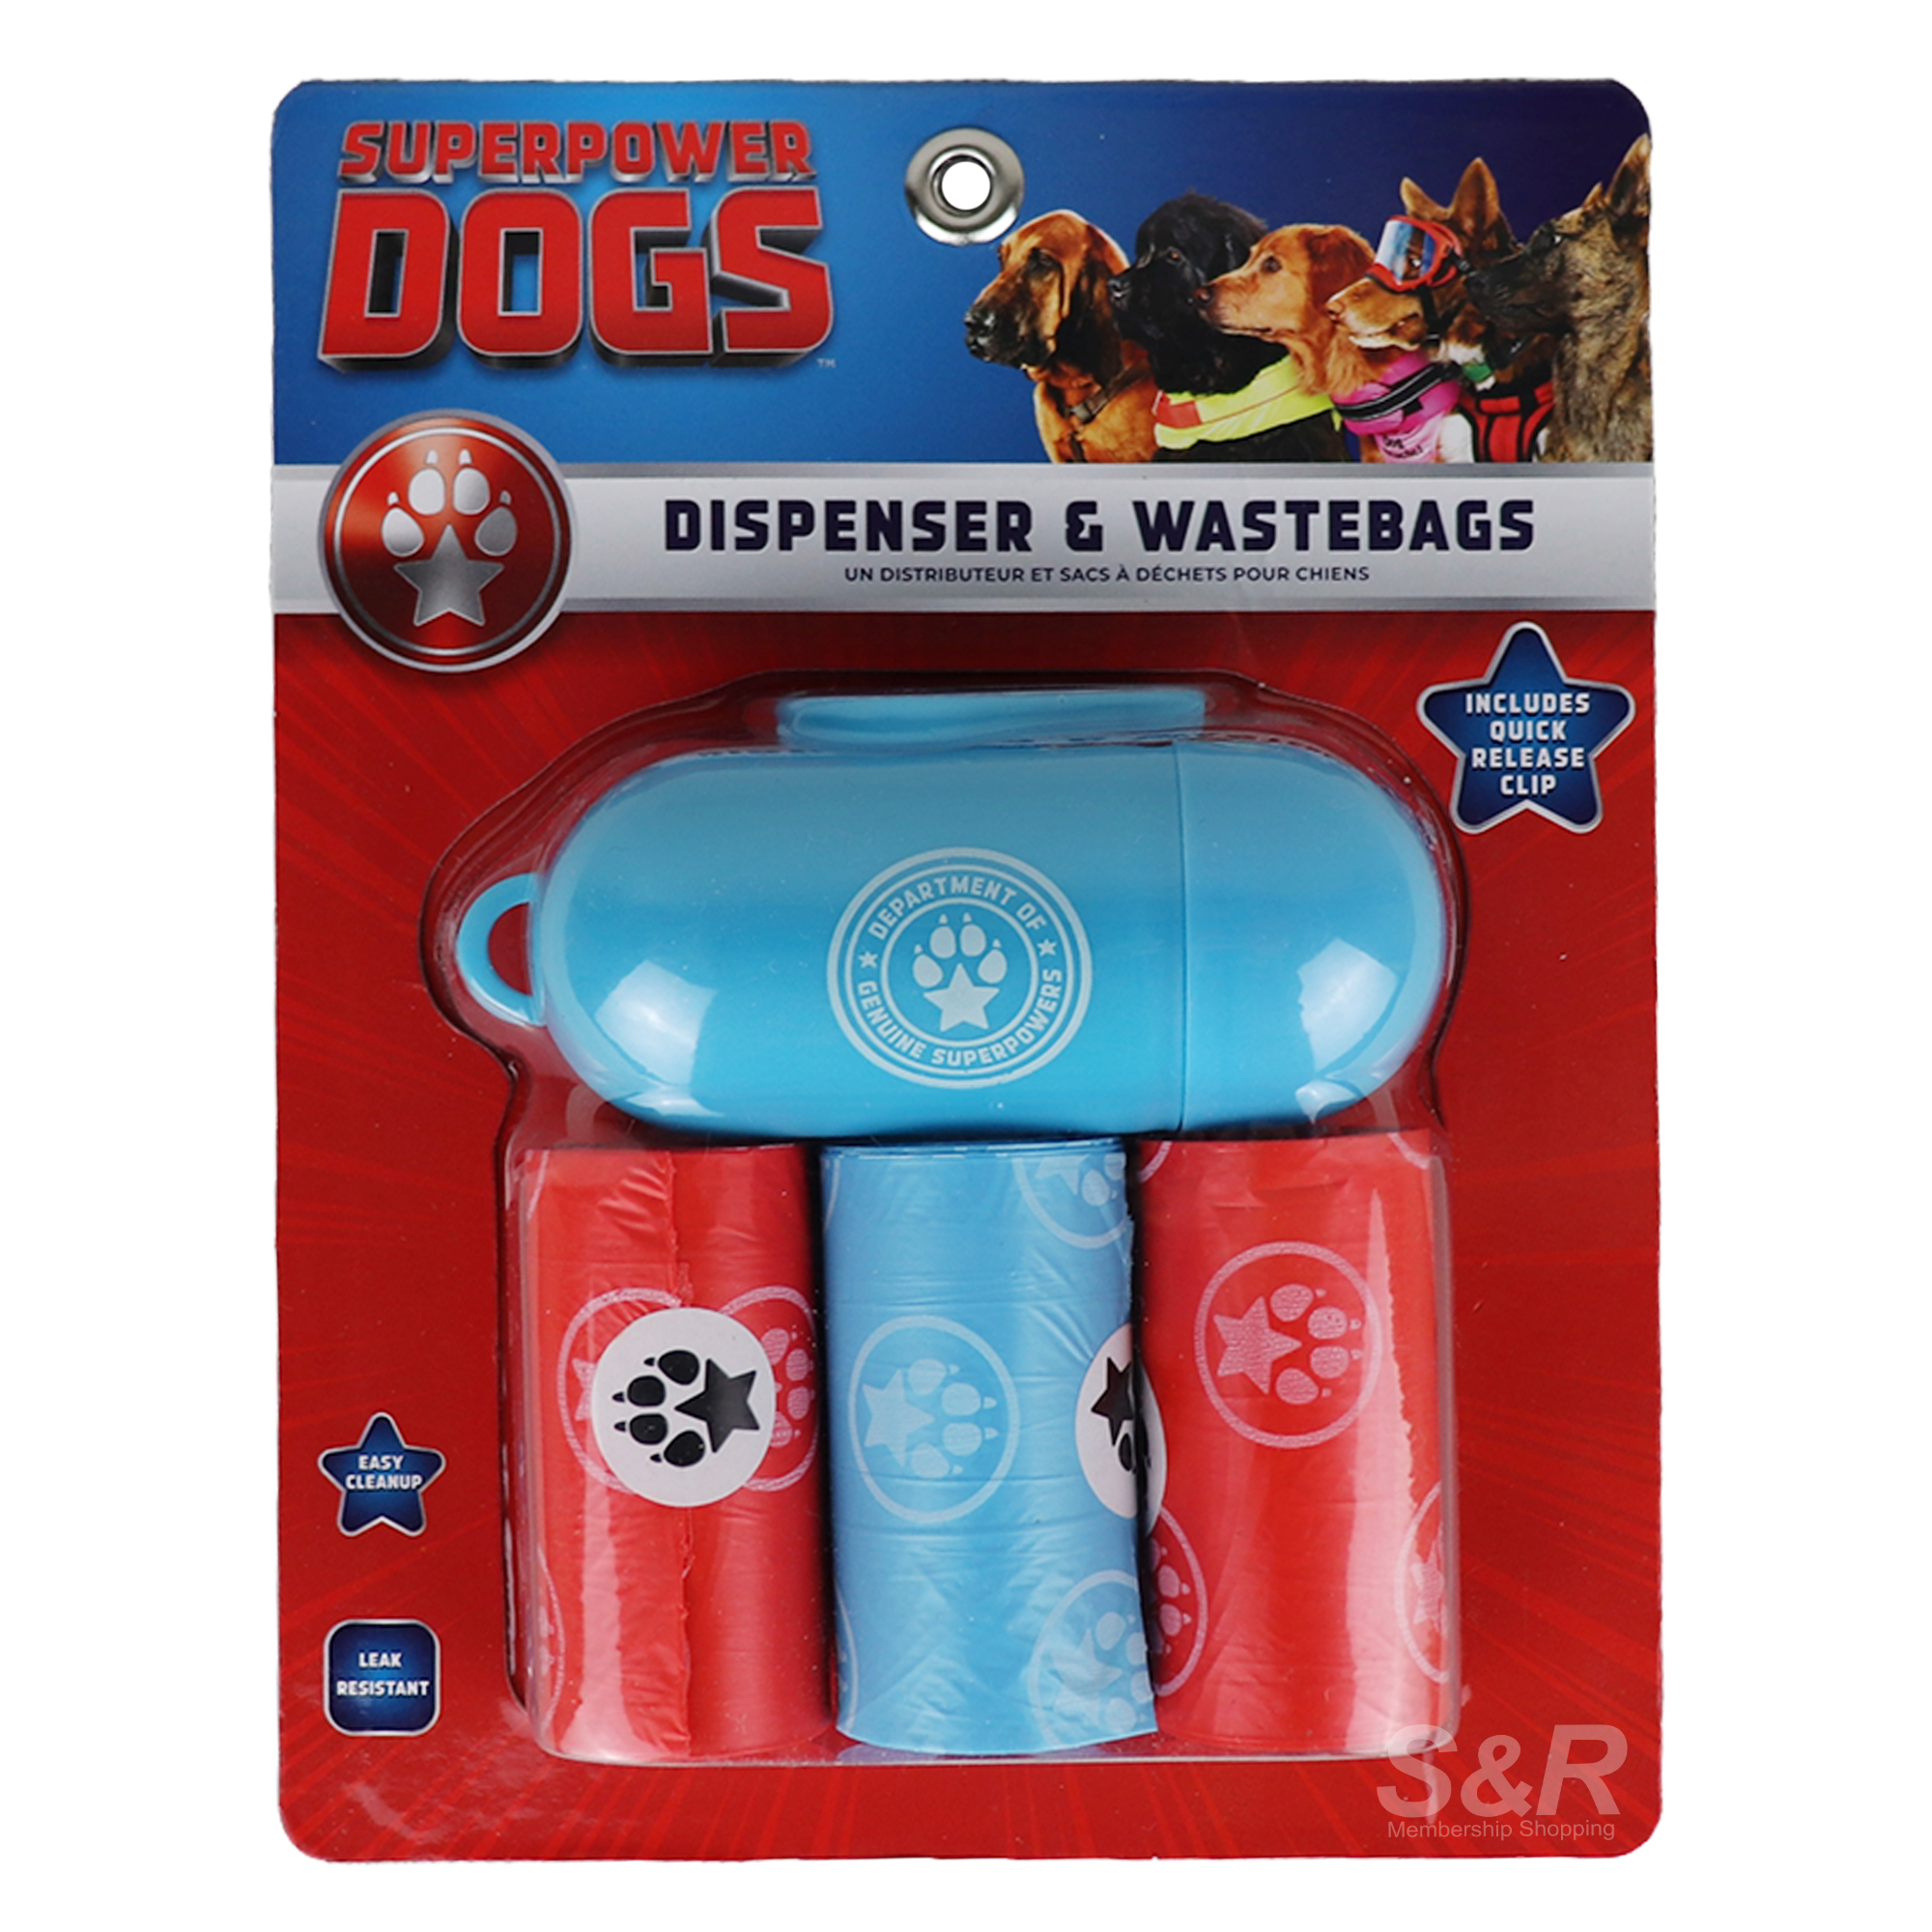 Super Power Dogs Dispenser and Waste Bags